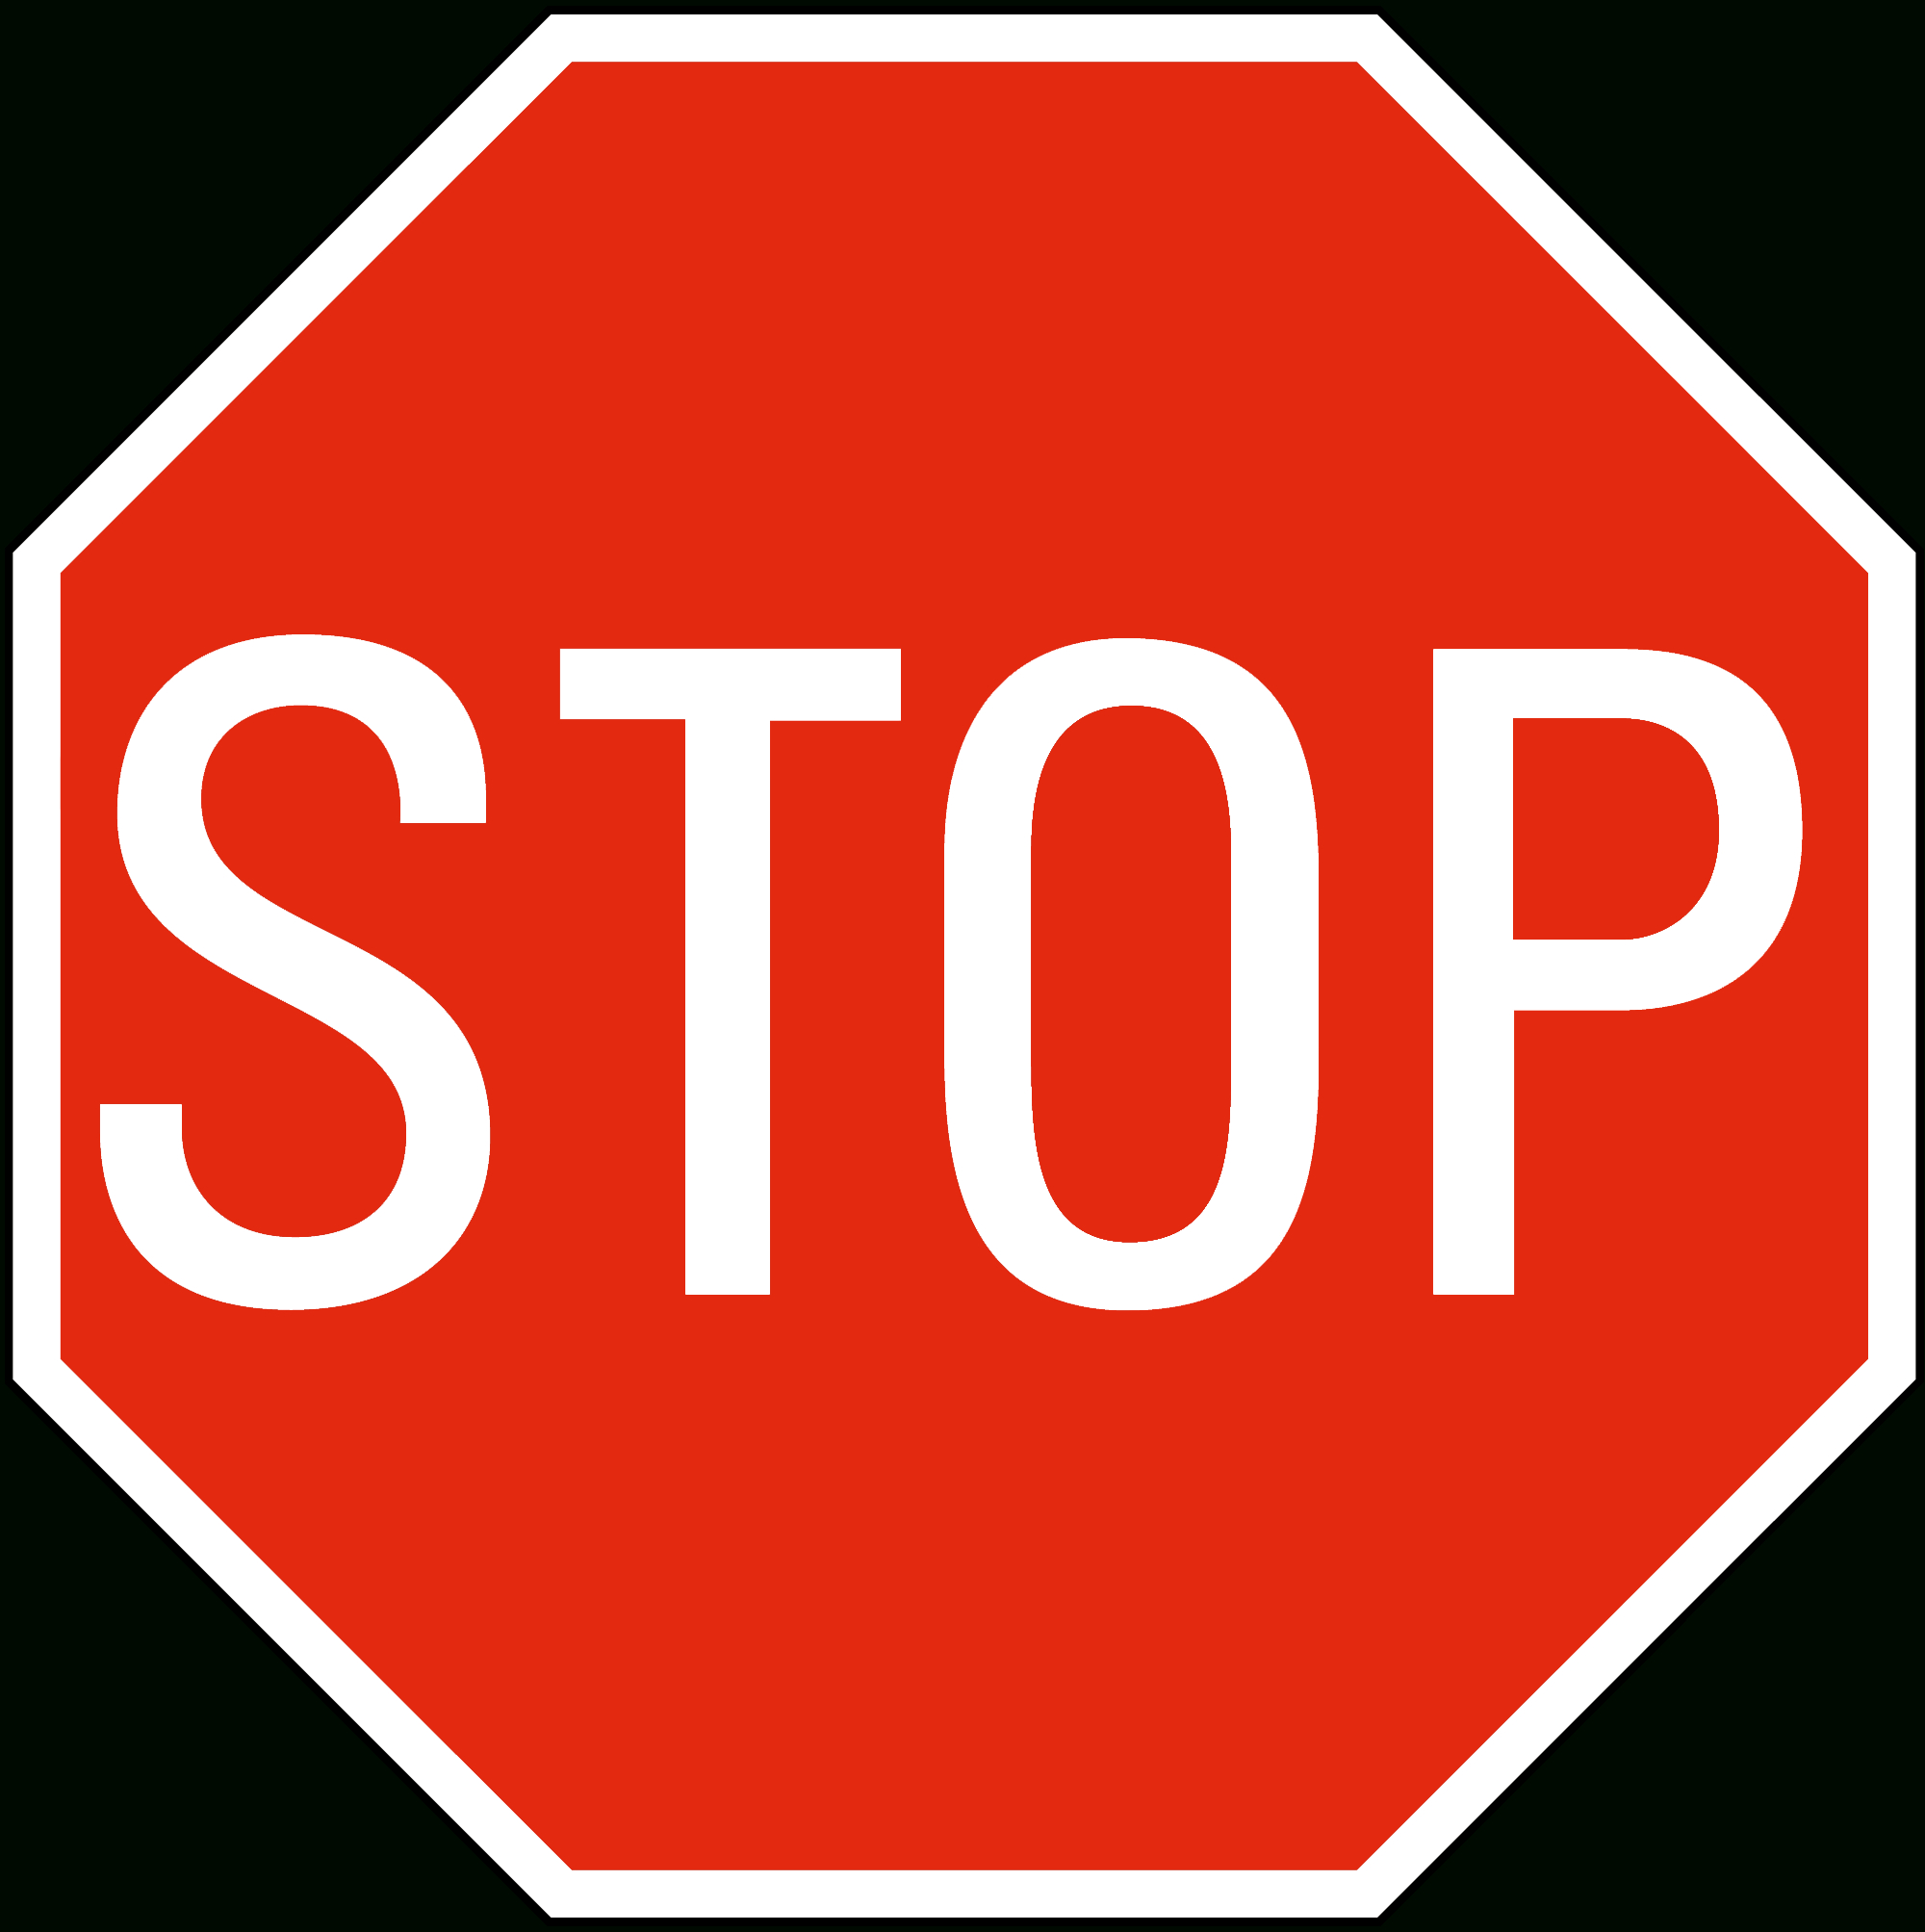 Free Printable Stop Signs, Download Free Clip Art, Free Clip Art On - Free Printable Stop Sign To Color